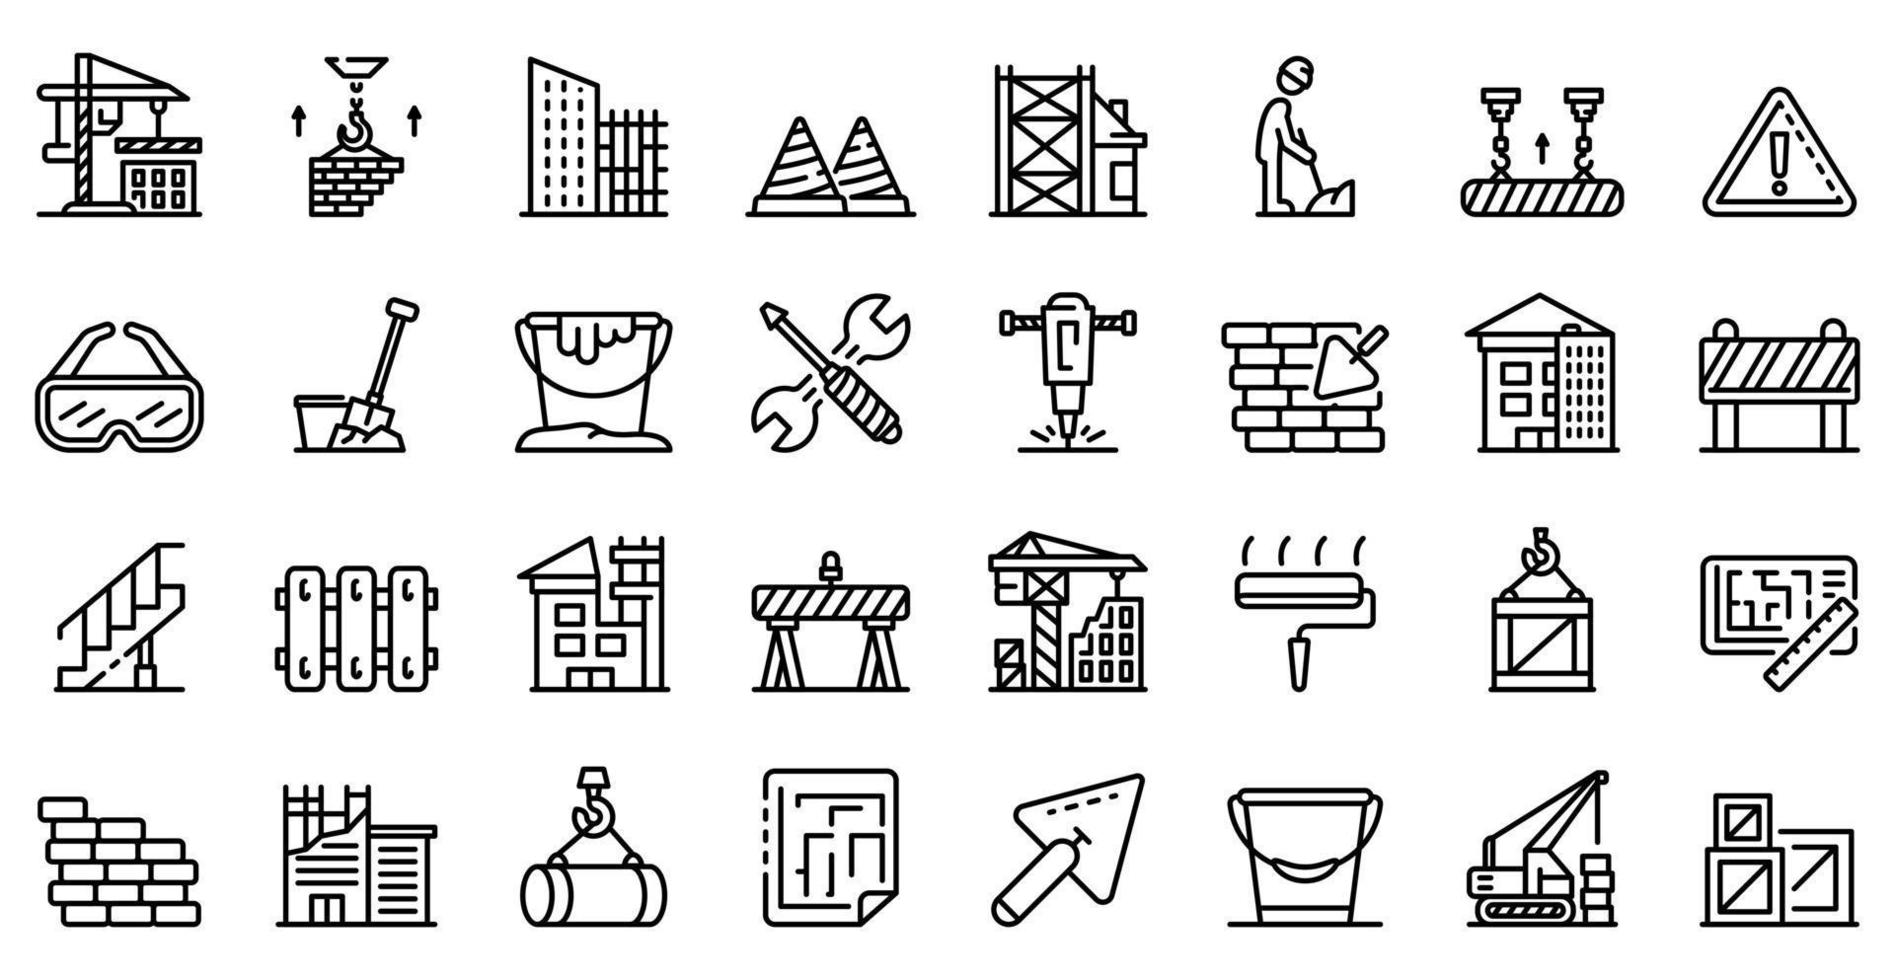 Building reconstruction icons set, outline style vector